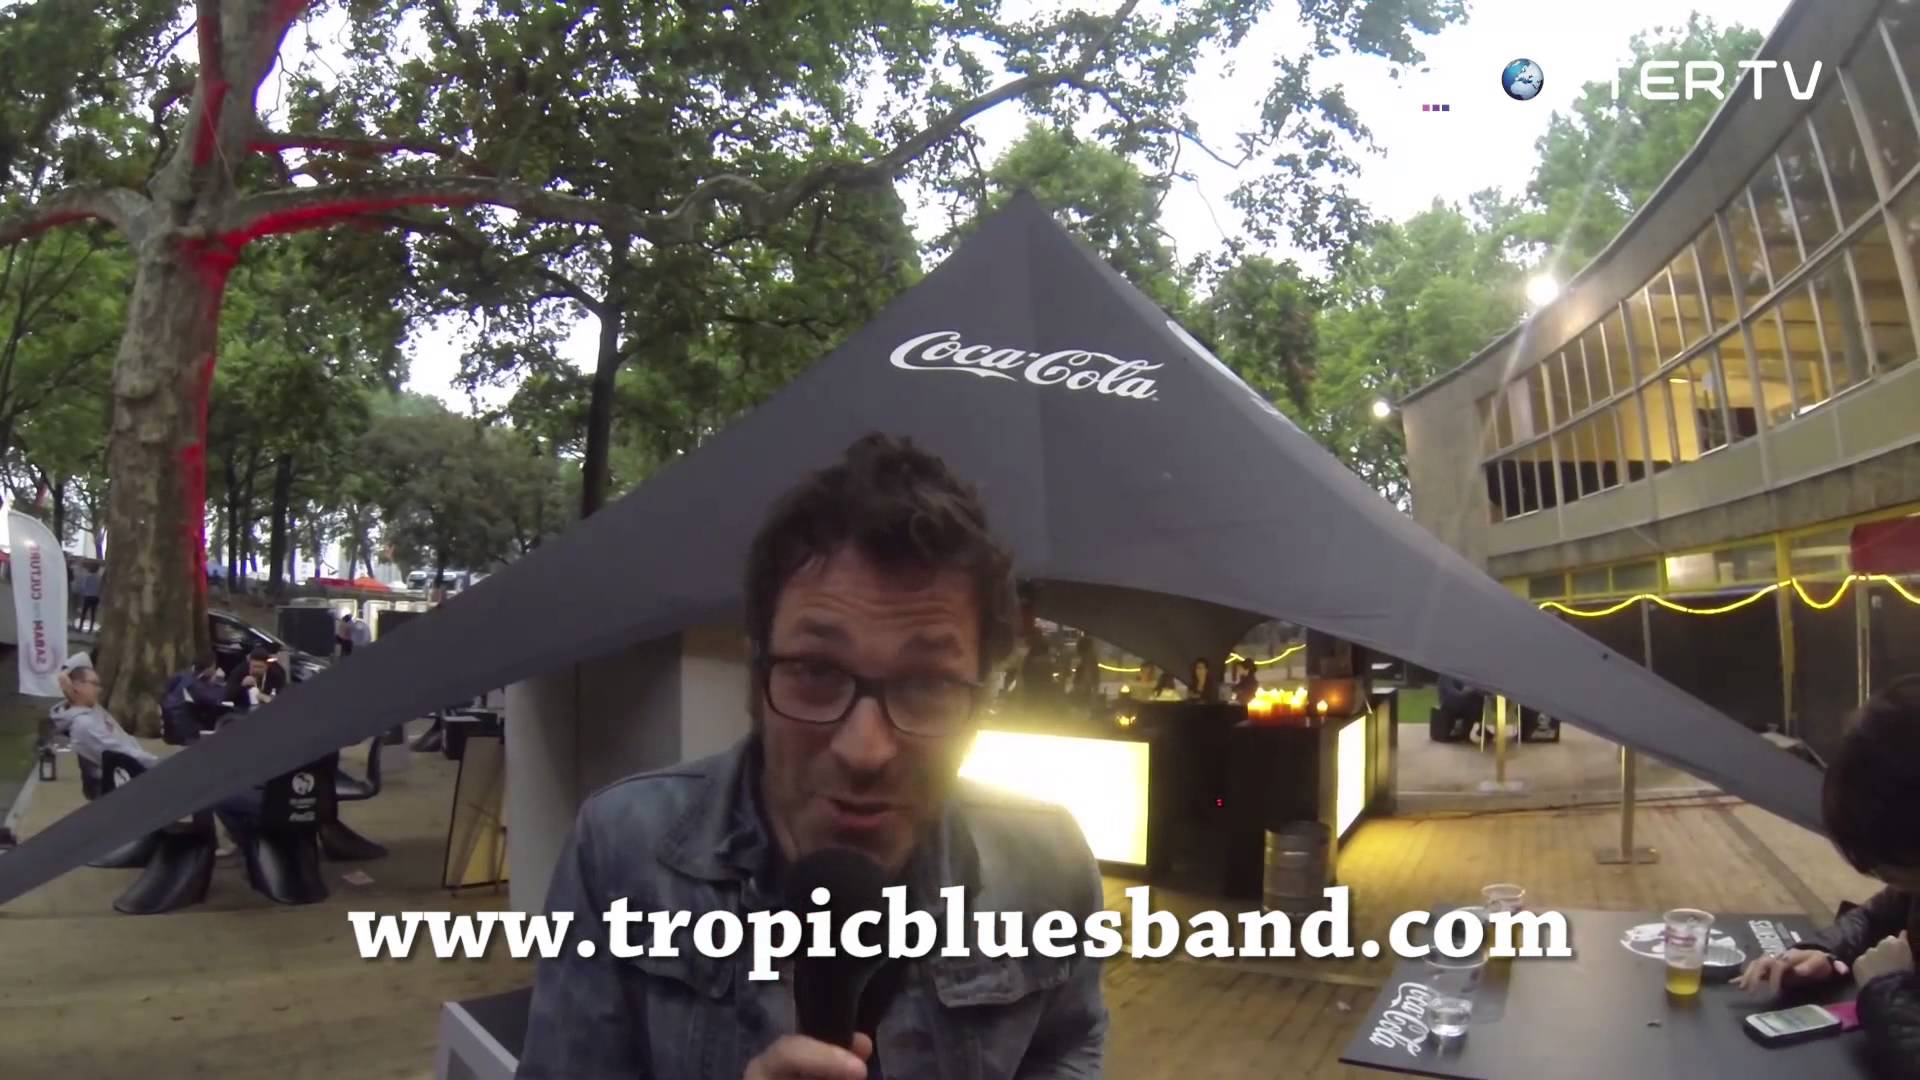 The Experimental Tropic Blues Band message pour Reporter TV